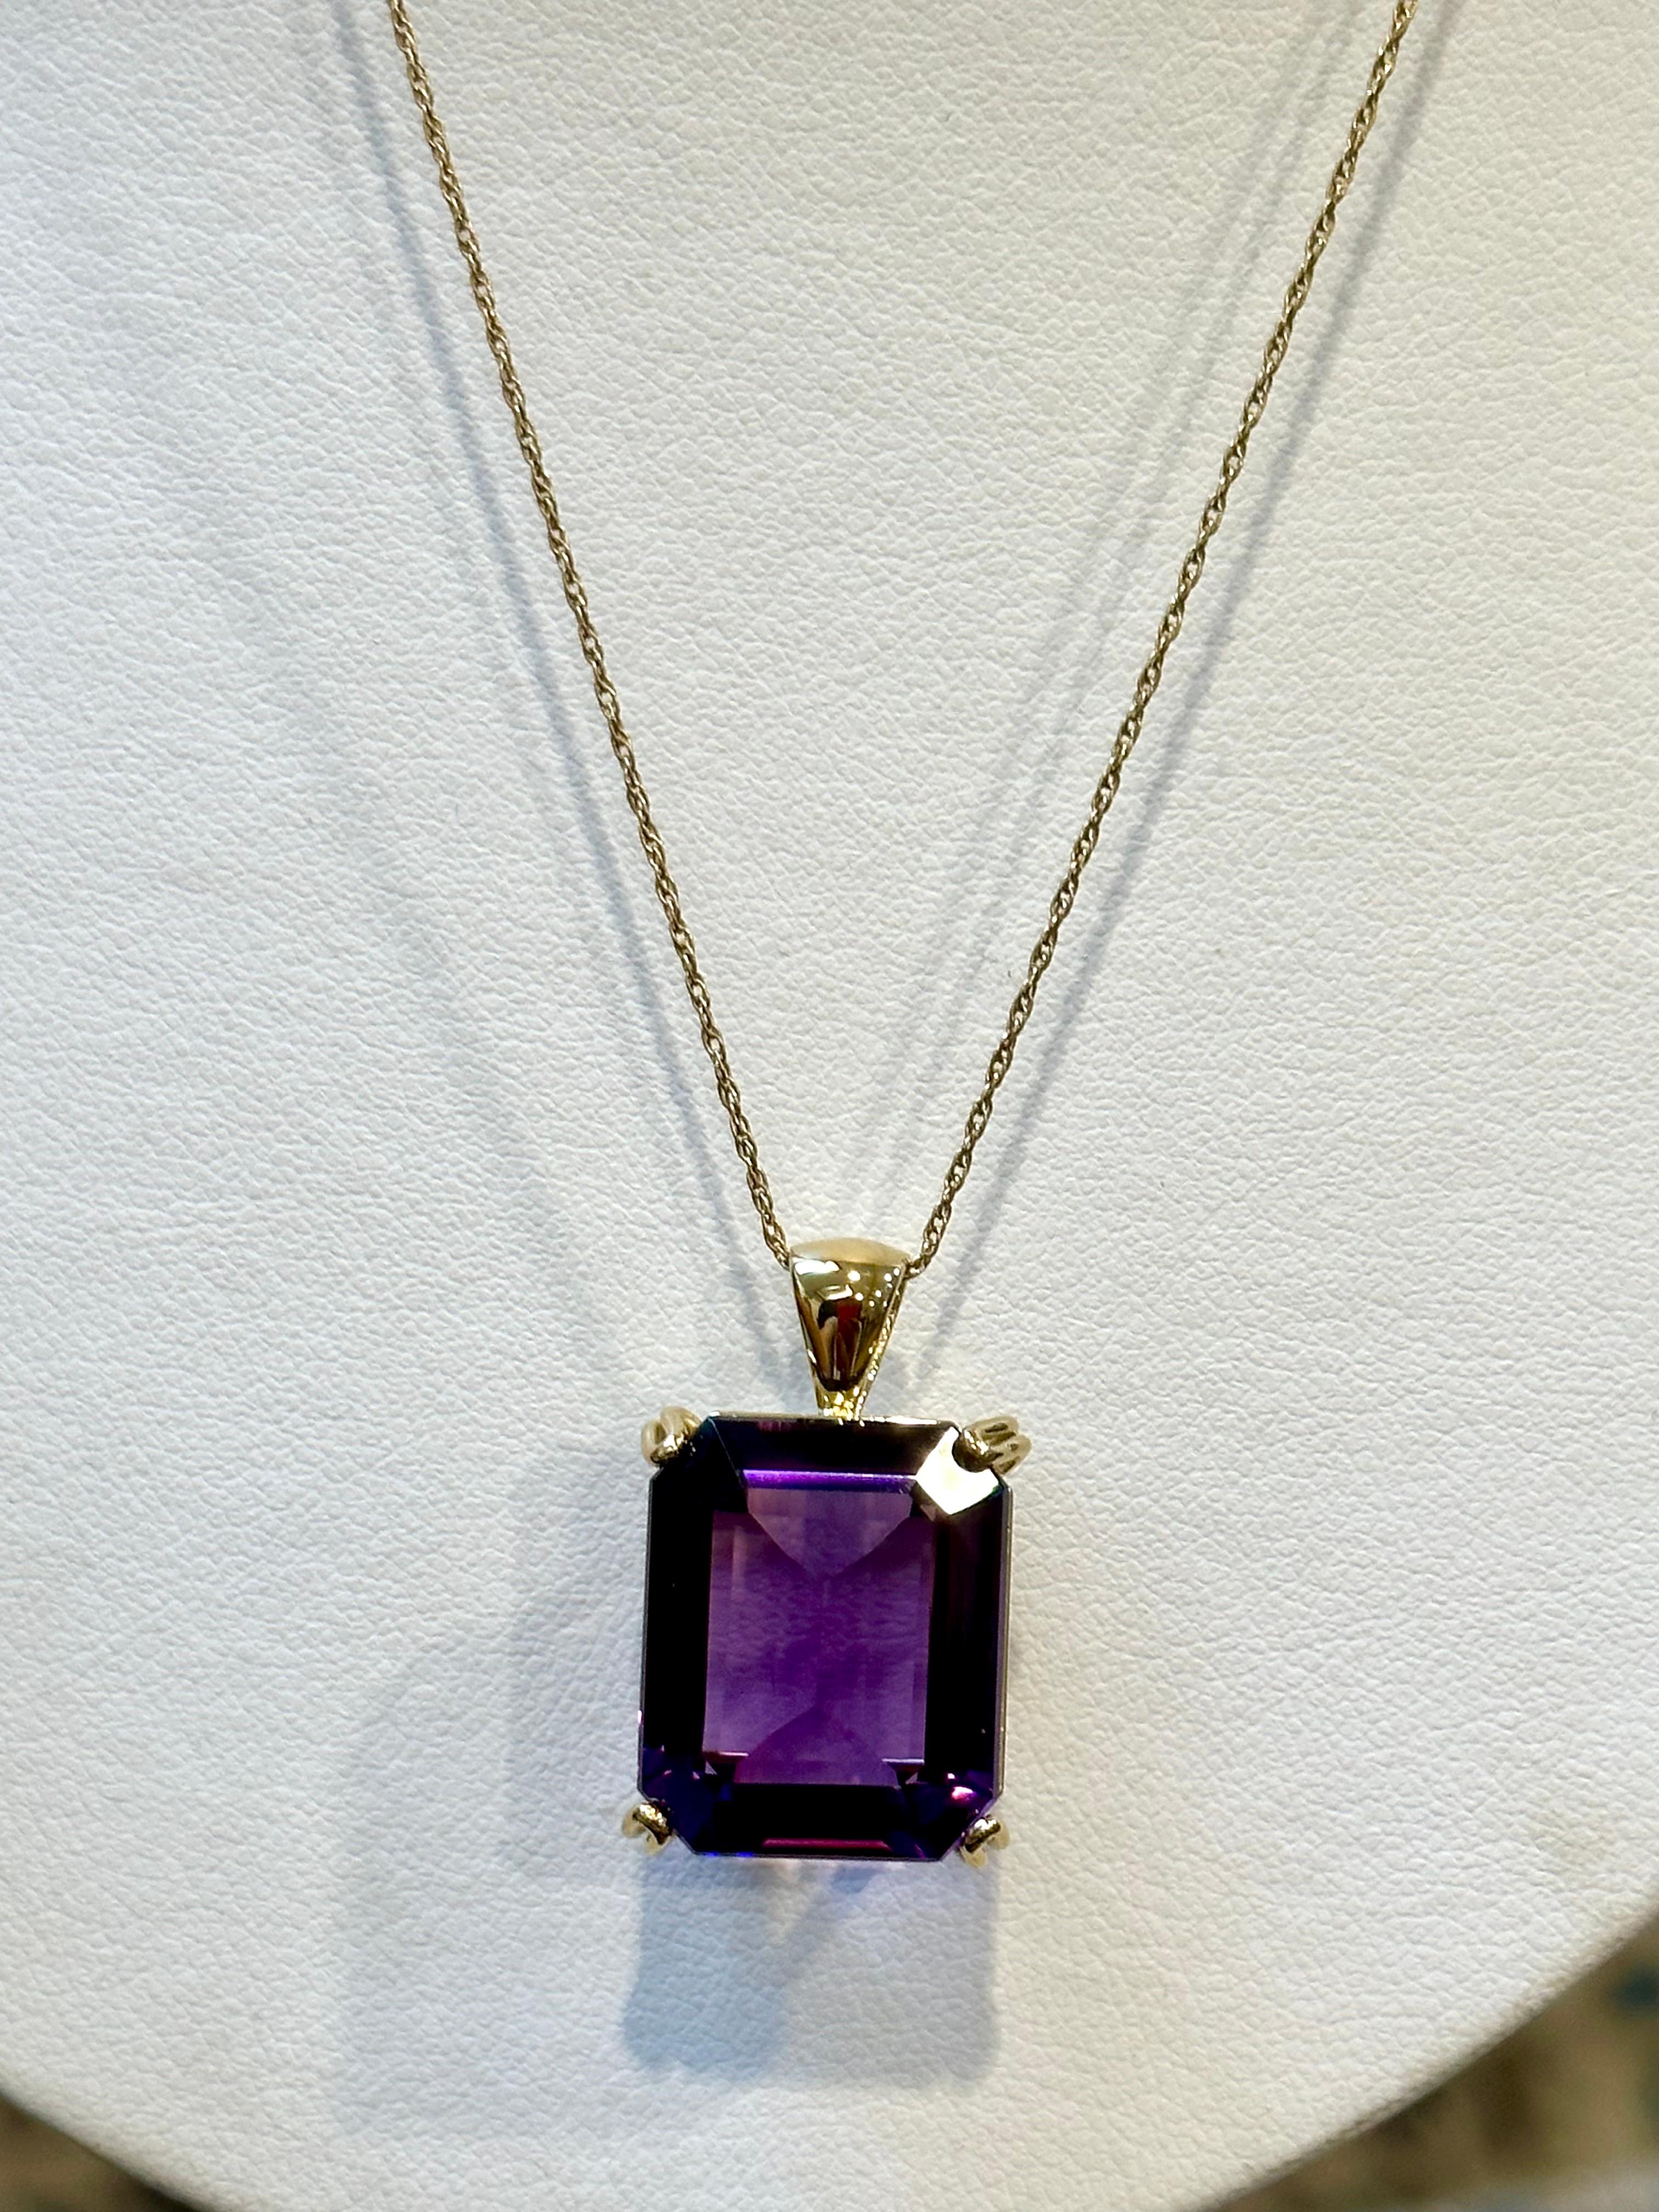 14 Ct Emerald Cut Amethyst Pendant/Neck 18Kt  Gold + 14 Kt Yellow Gold Chain For Sale 8